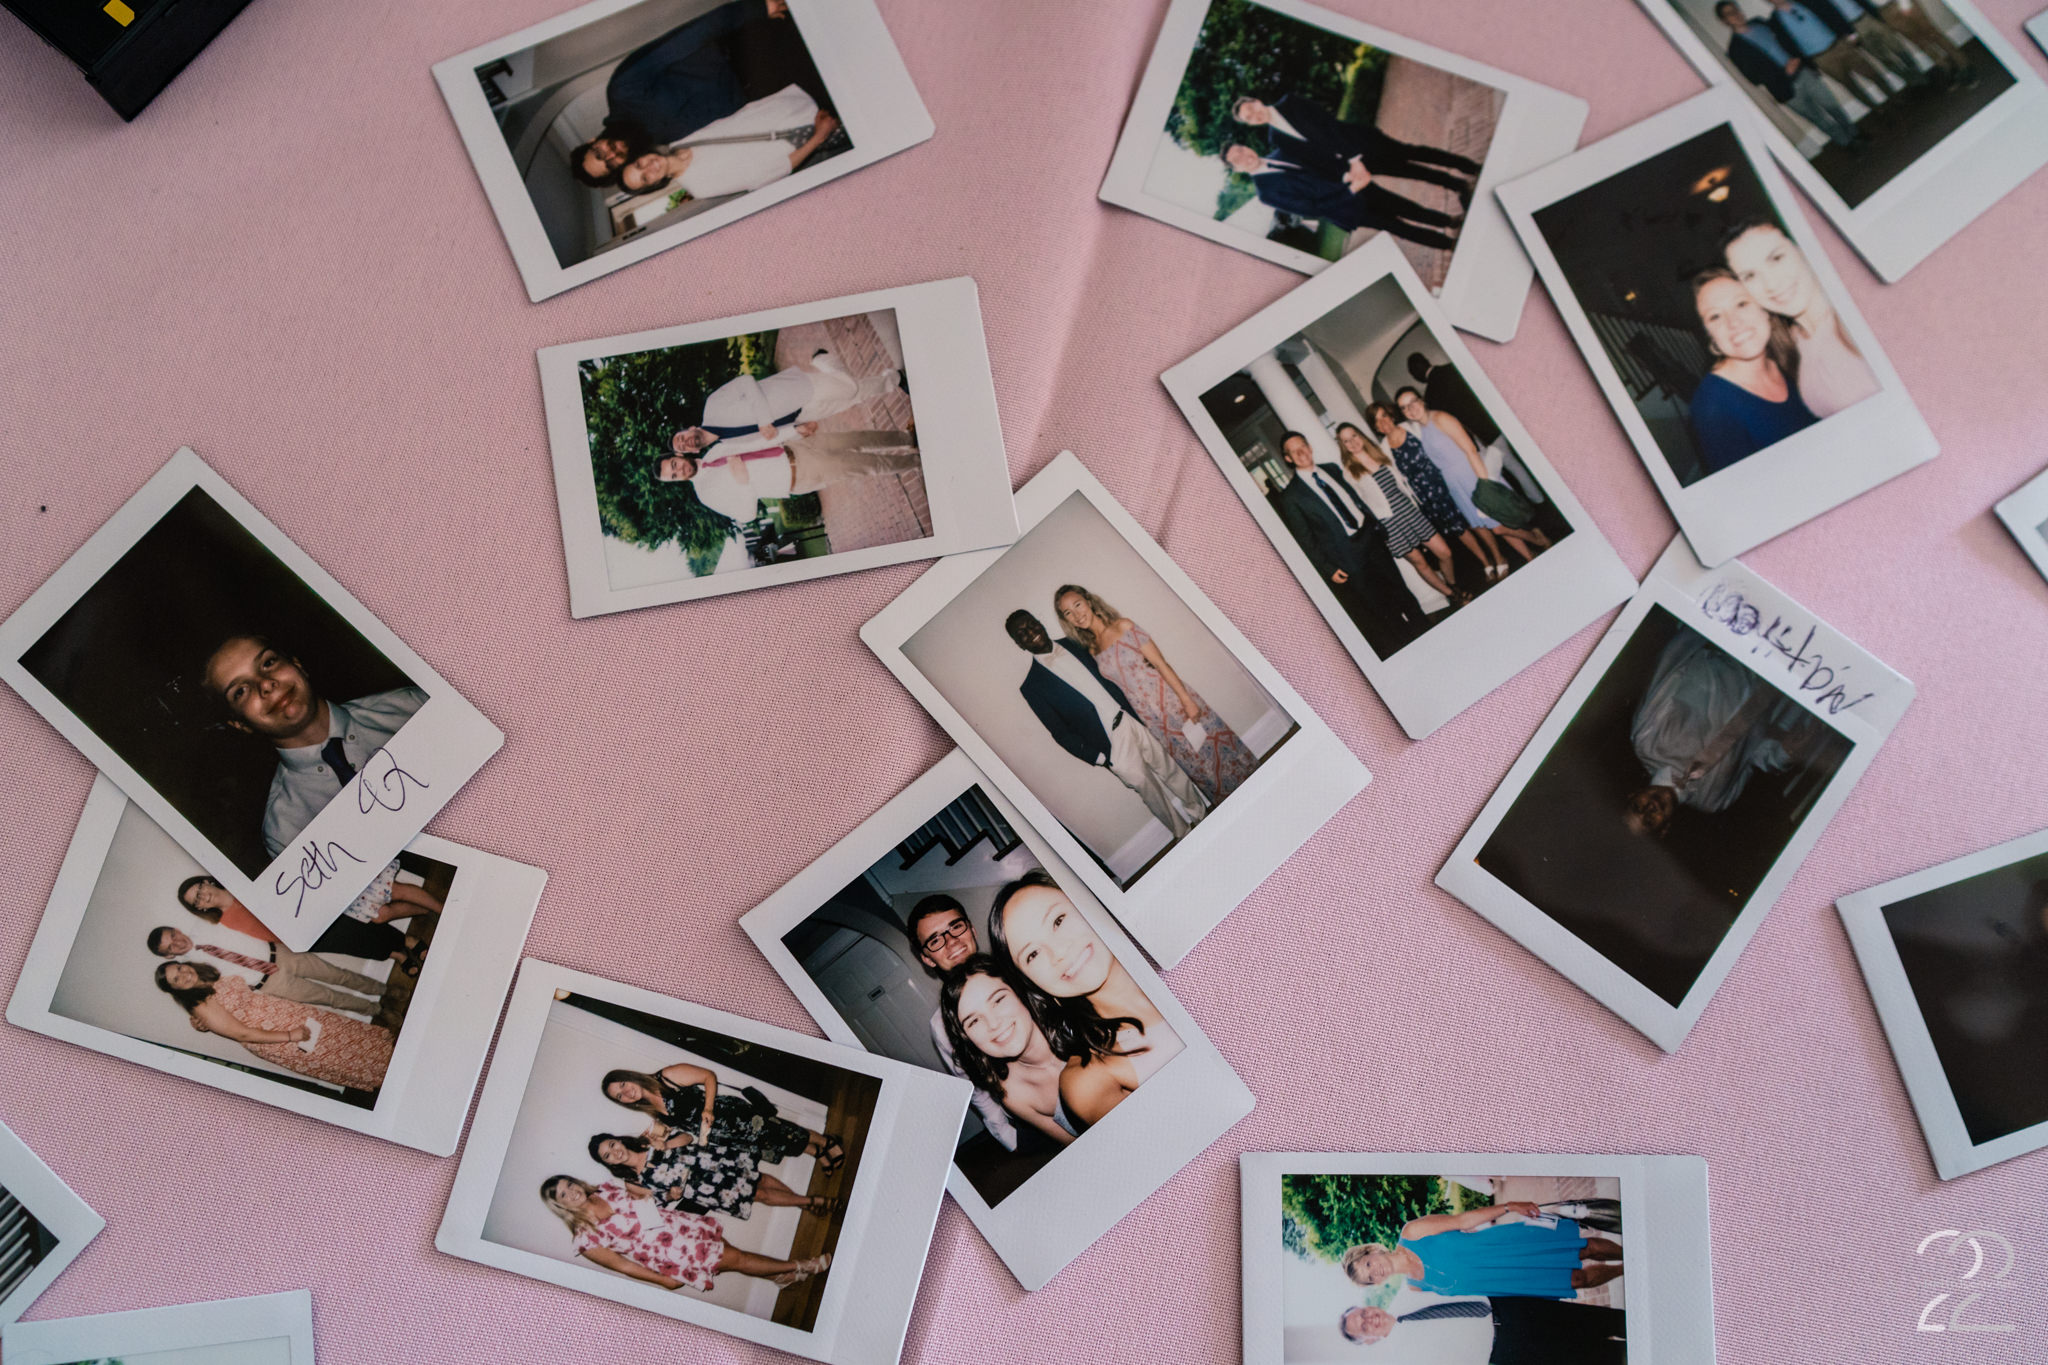  Photo guest books are an outstanding idea. This ensures you have a photo of each of your guests, and also creates a time capsule for future generations! 